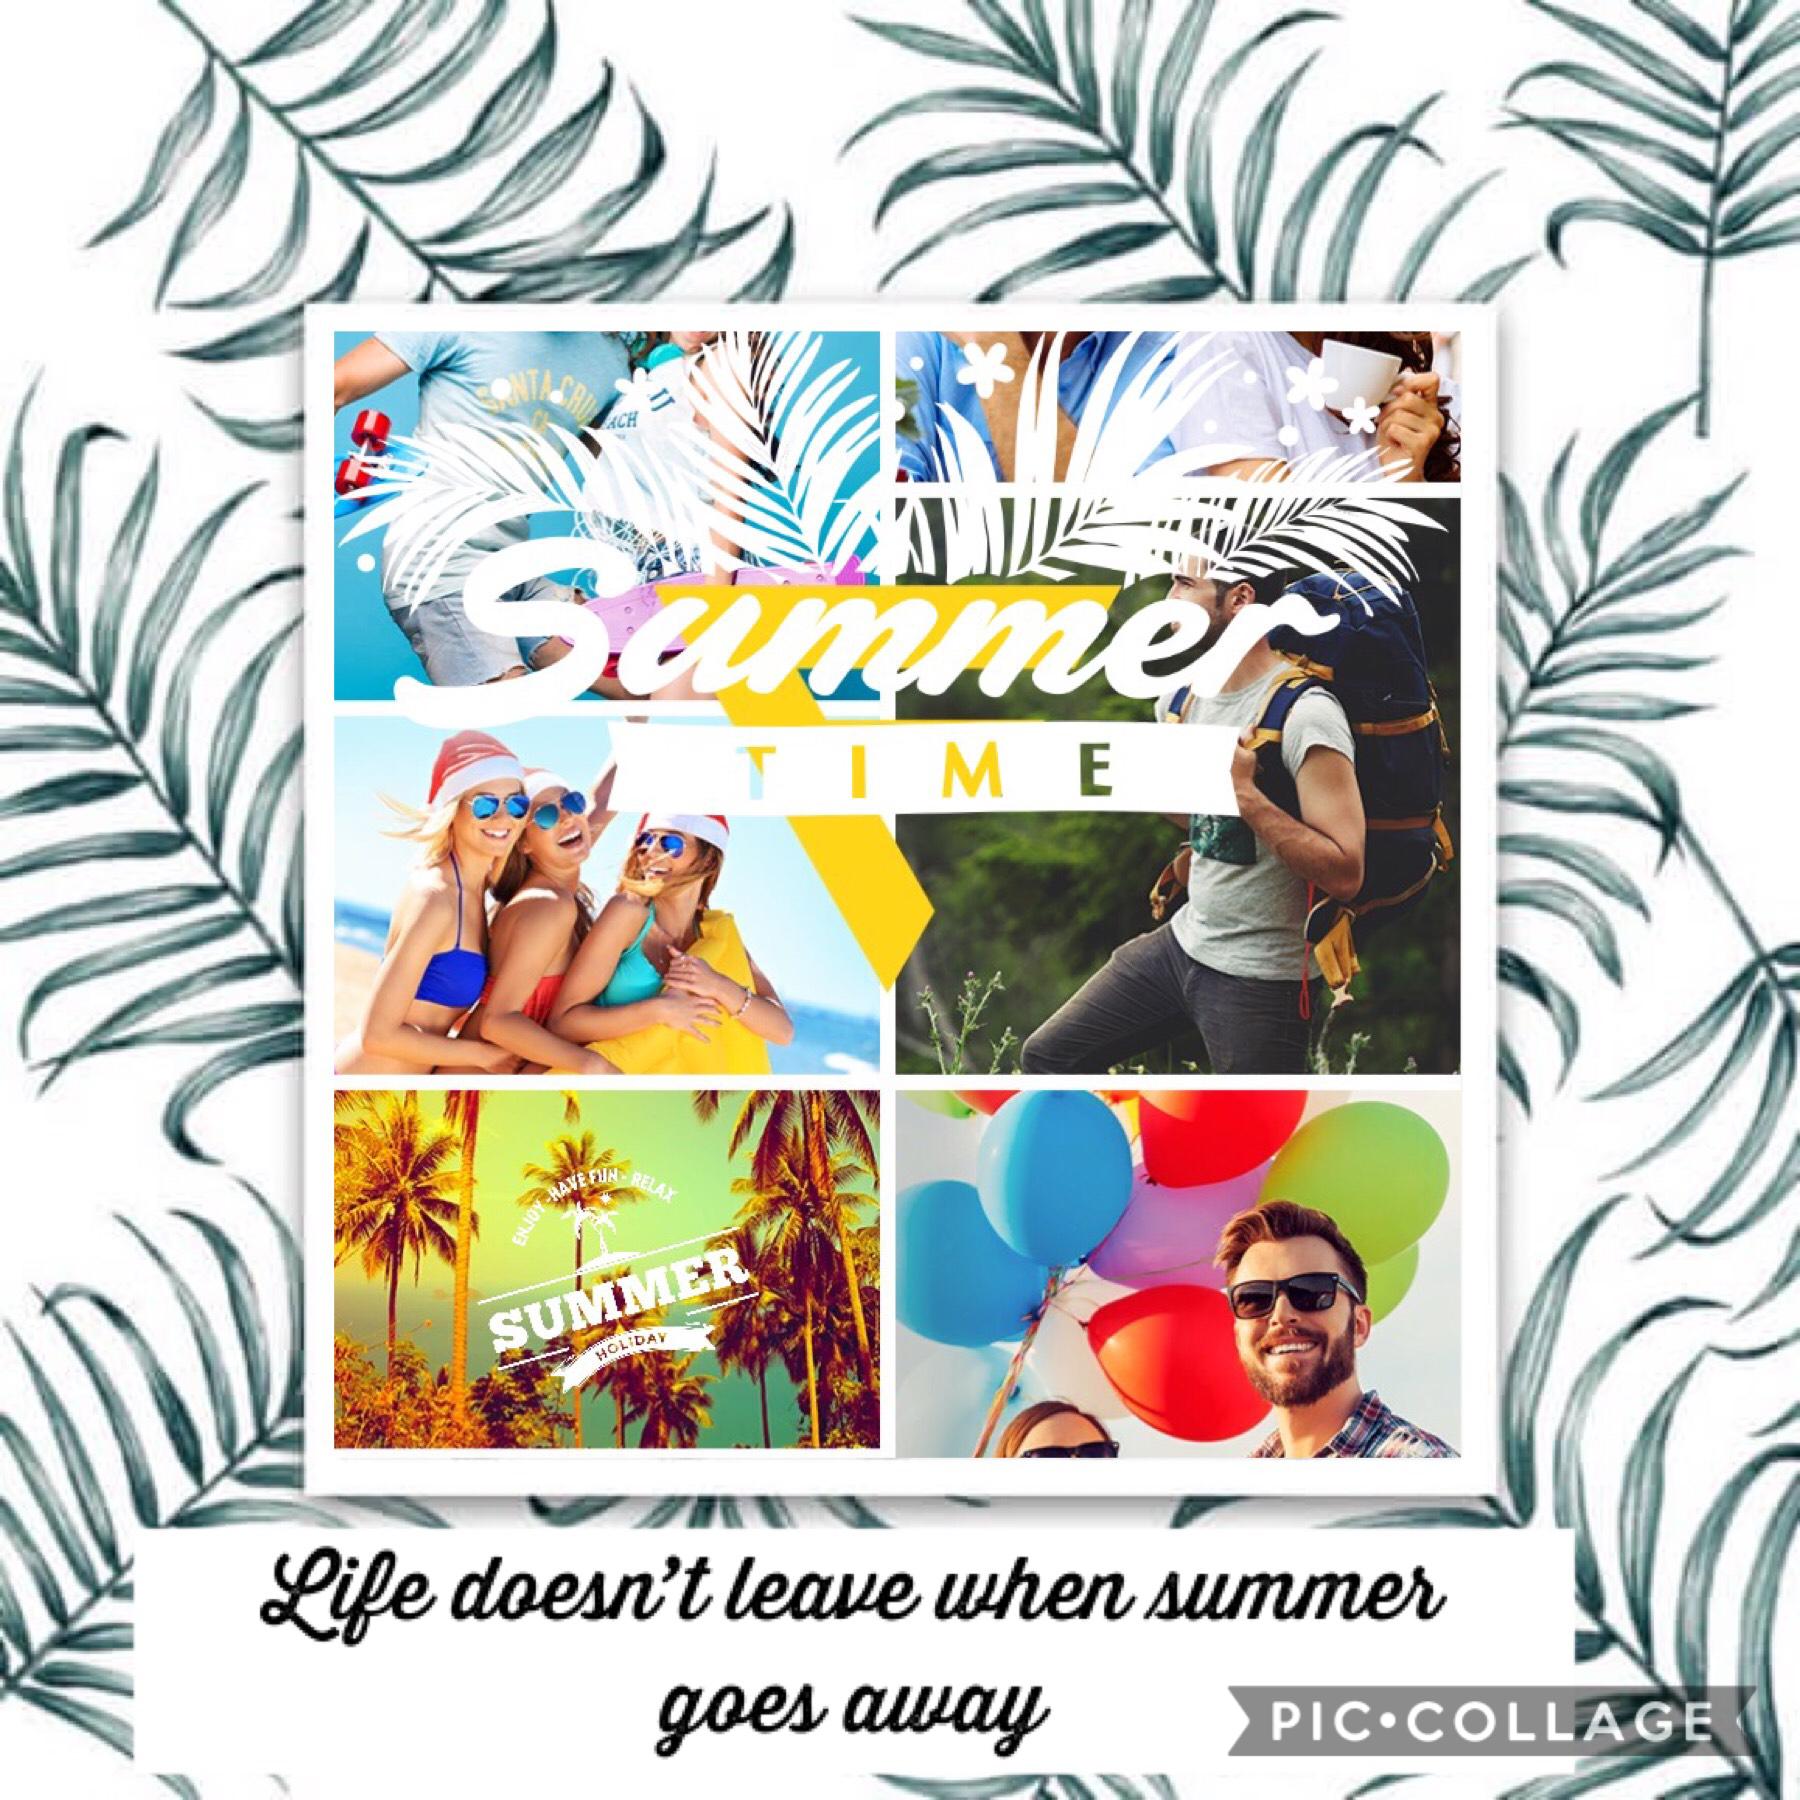 🐚Tap🐚

🏄‍♀️I know that it’s not summer anymore but we should still enjoy life🏄‍♀️
🥶Say #Summer/Winter in the comments if you read this🥶